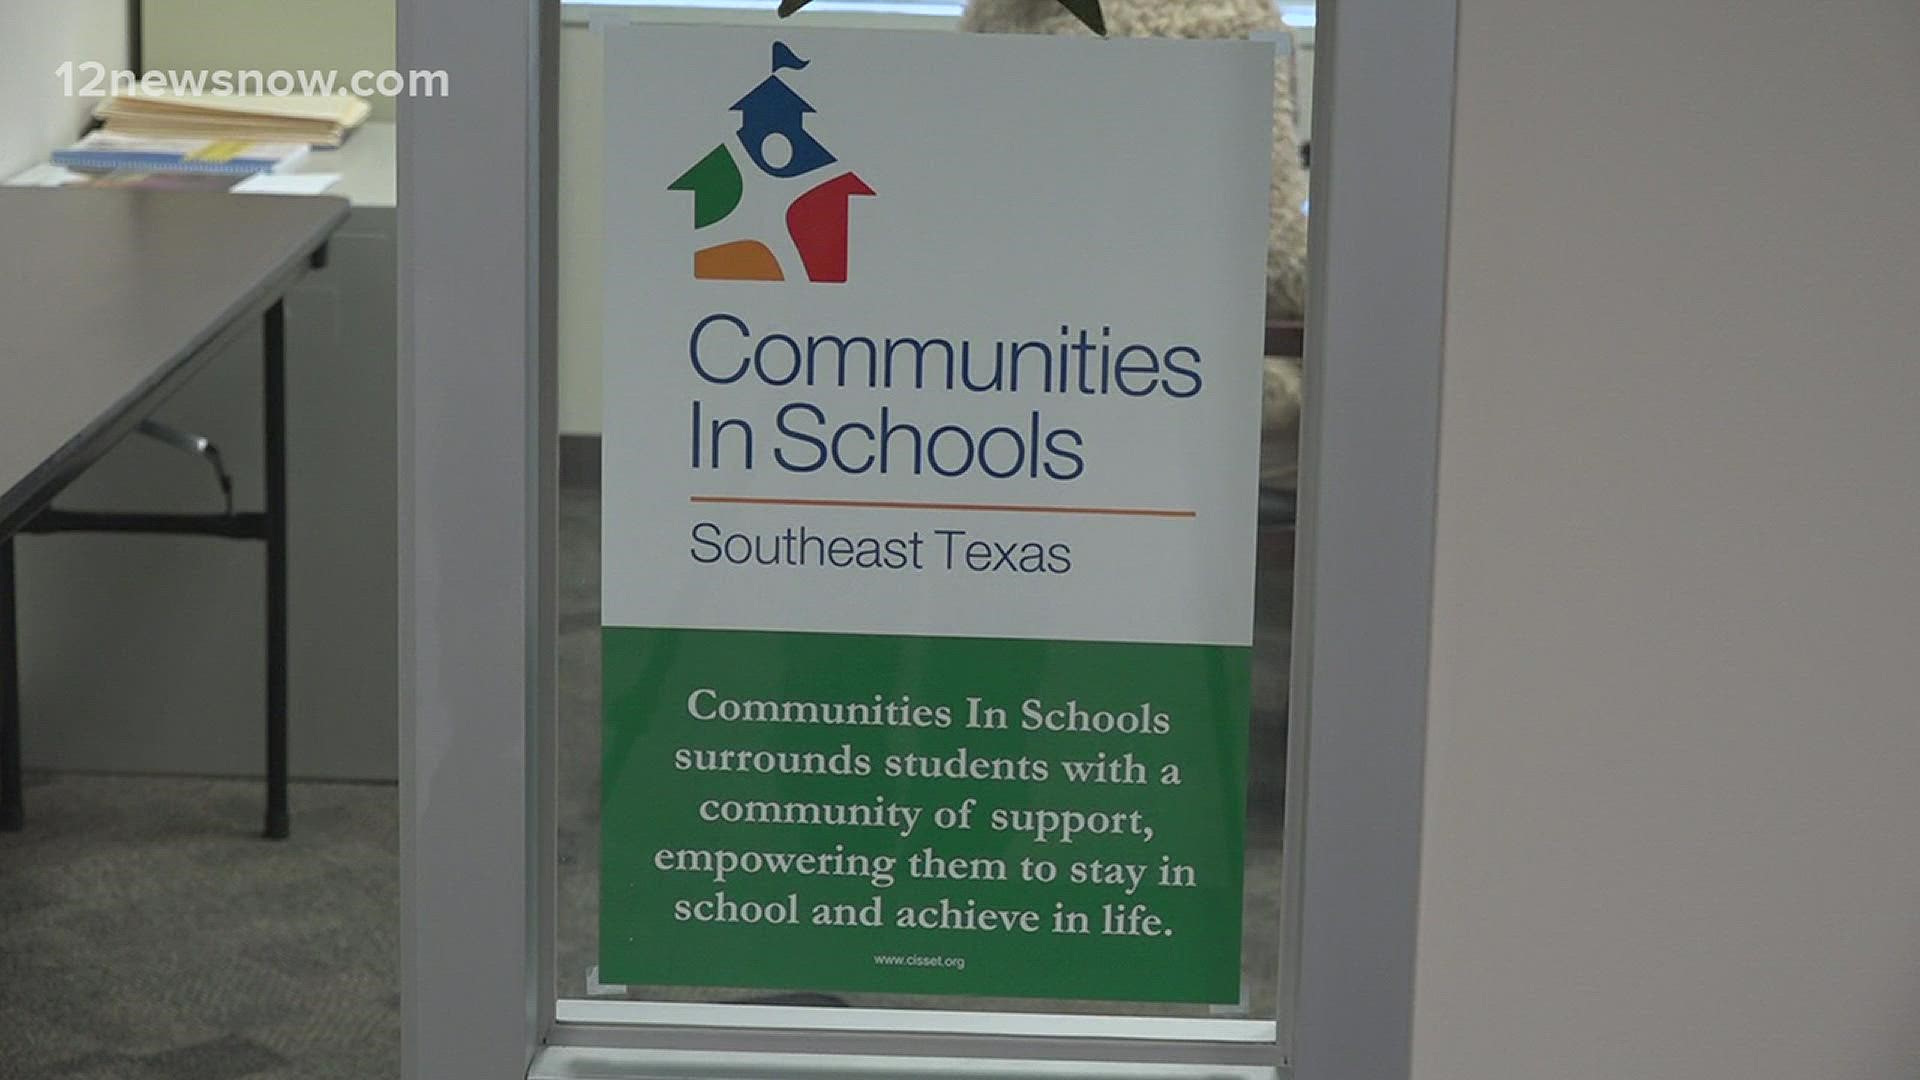 The organization said the money will stay in area schools to help students and families.